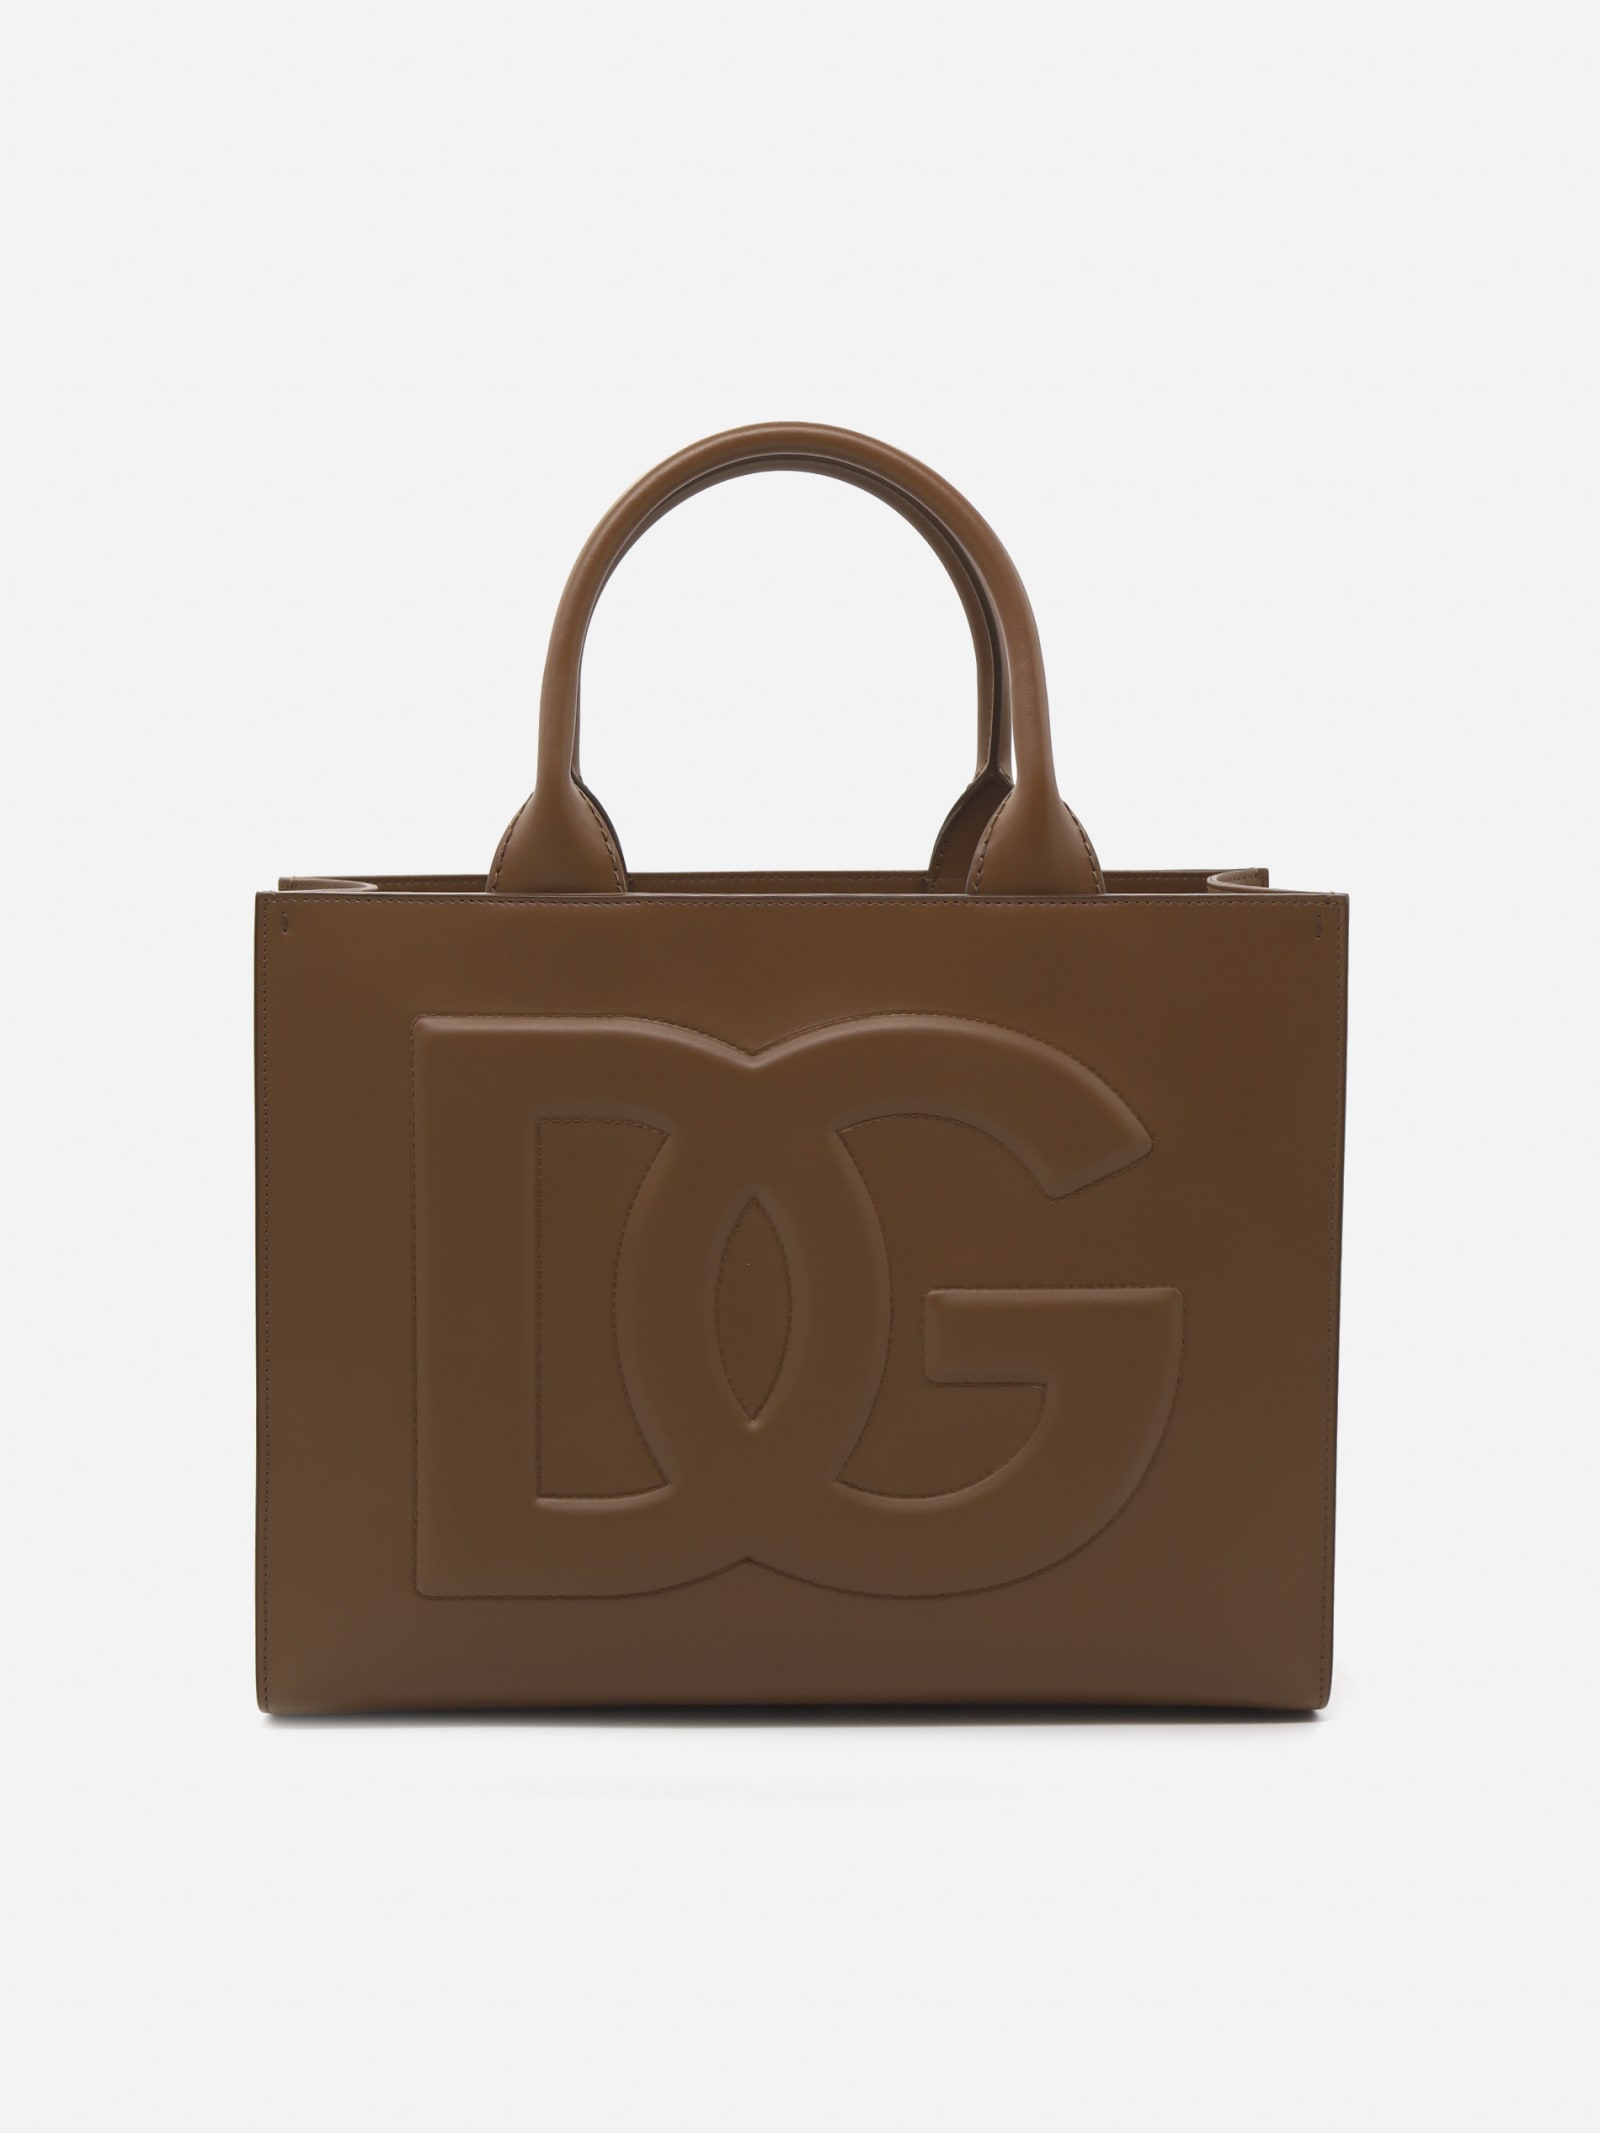 Dolce & Gabbana Beatrice Tote Bag In Leather With Embossed Monogram